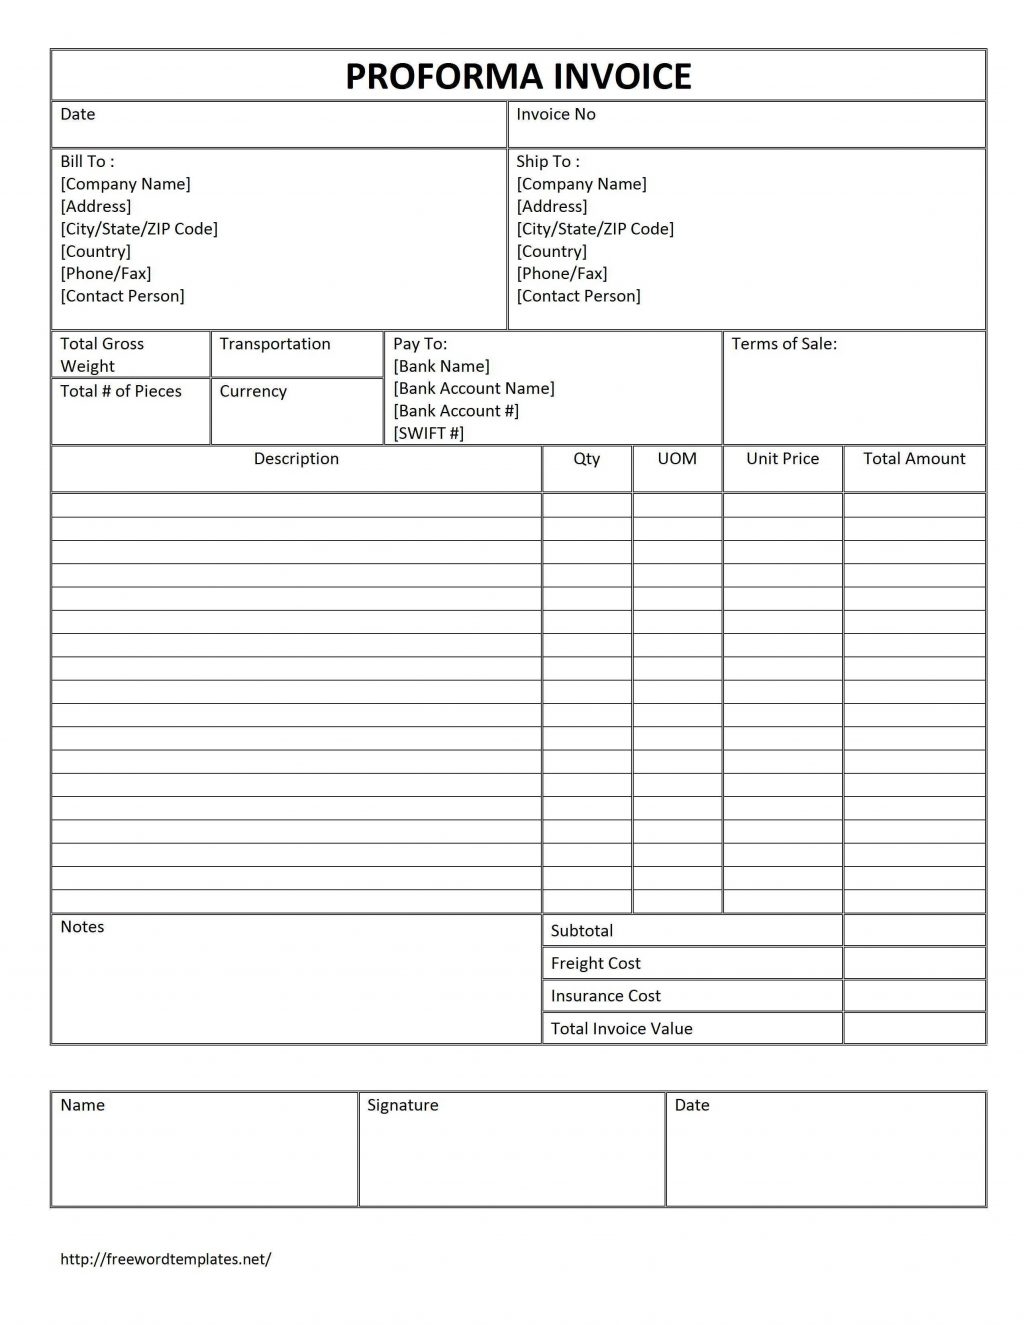 pro forma excel spreadsheet proforma invoice template free pro forma invoice of 300 jotters